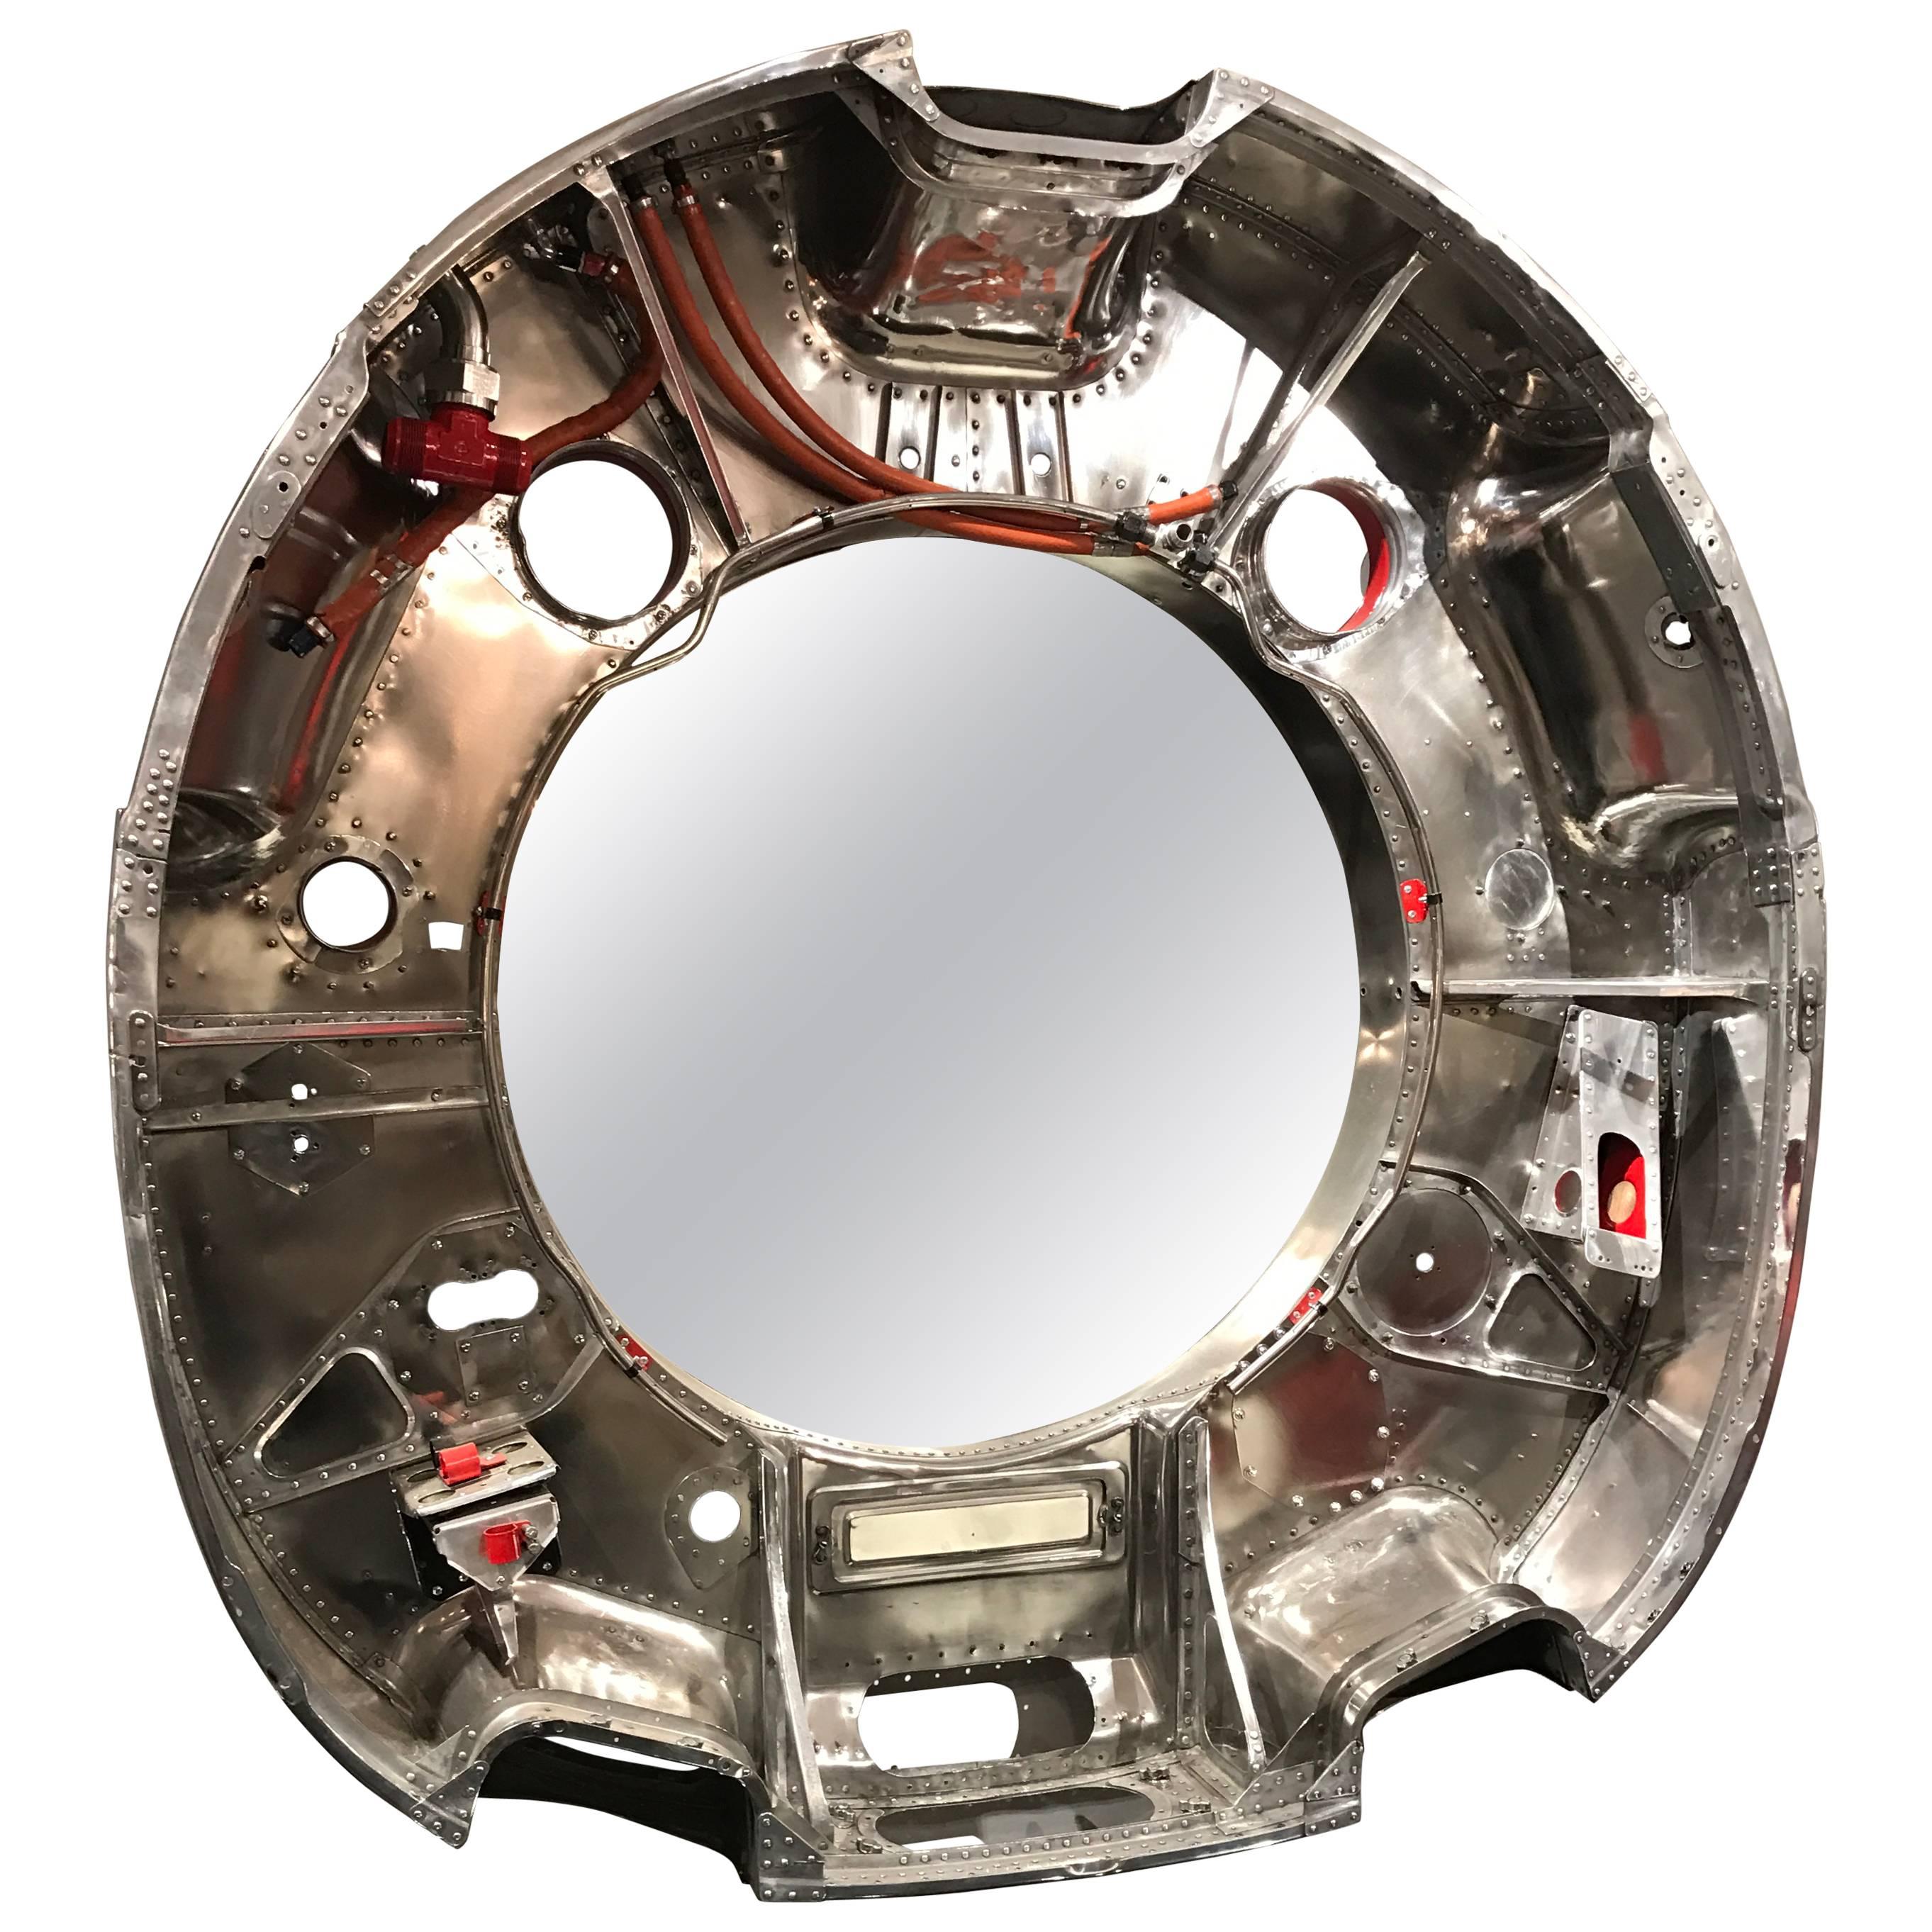 1947 Airplane Relic Mirror For Sale